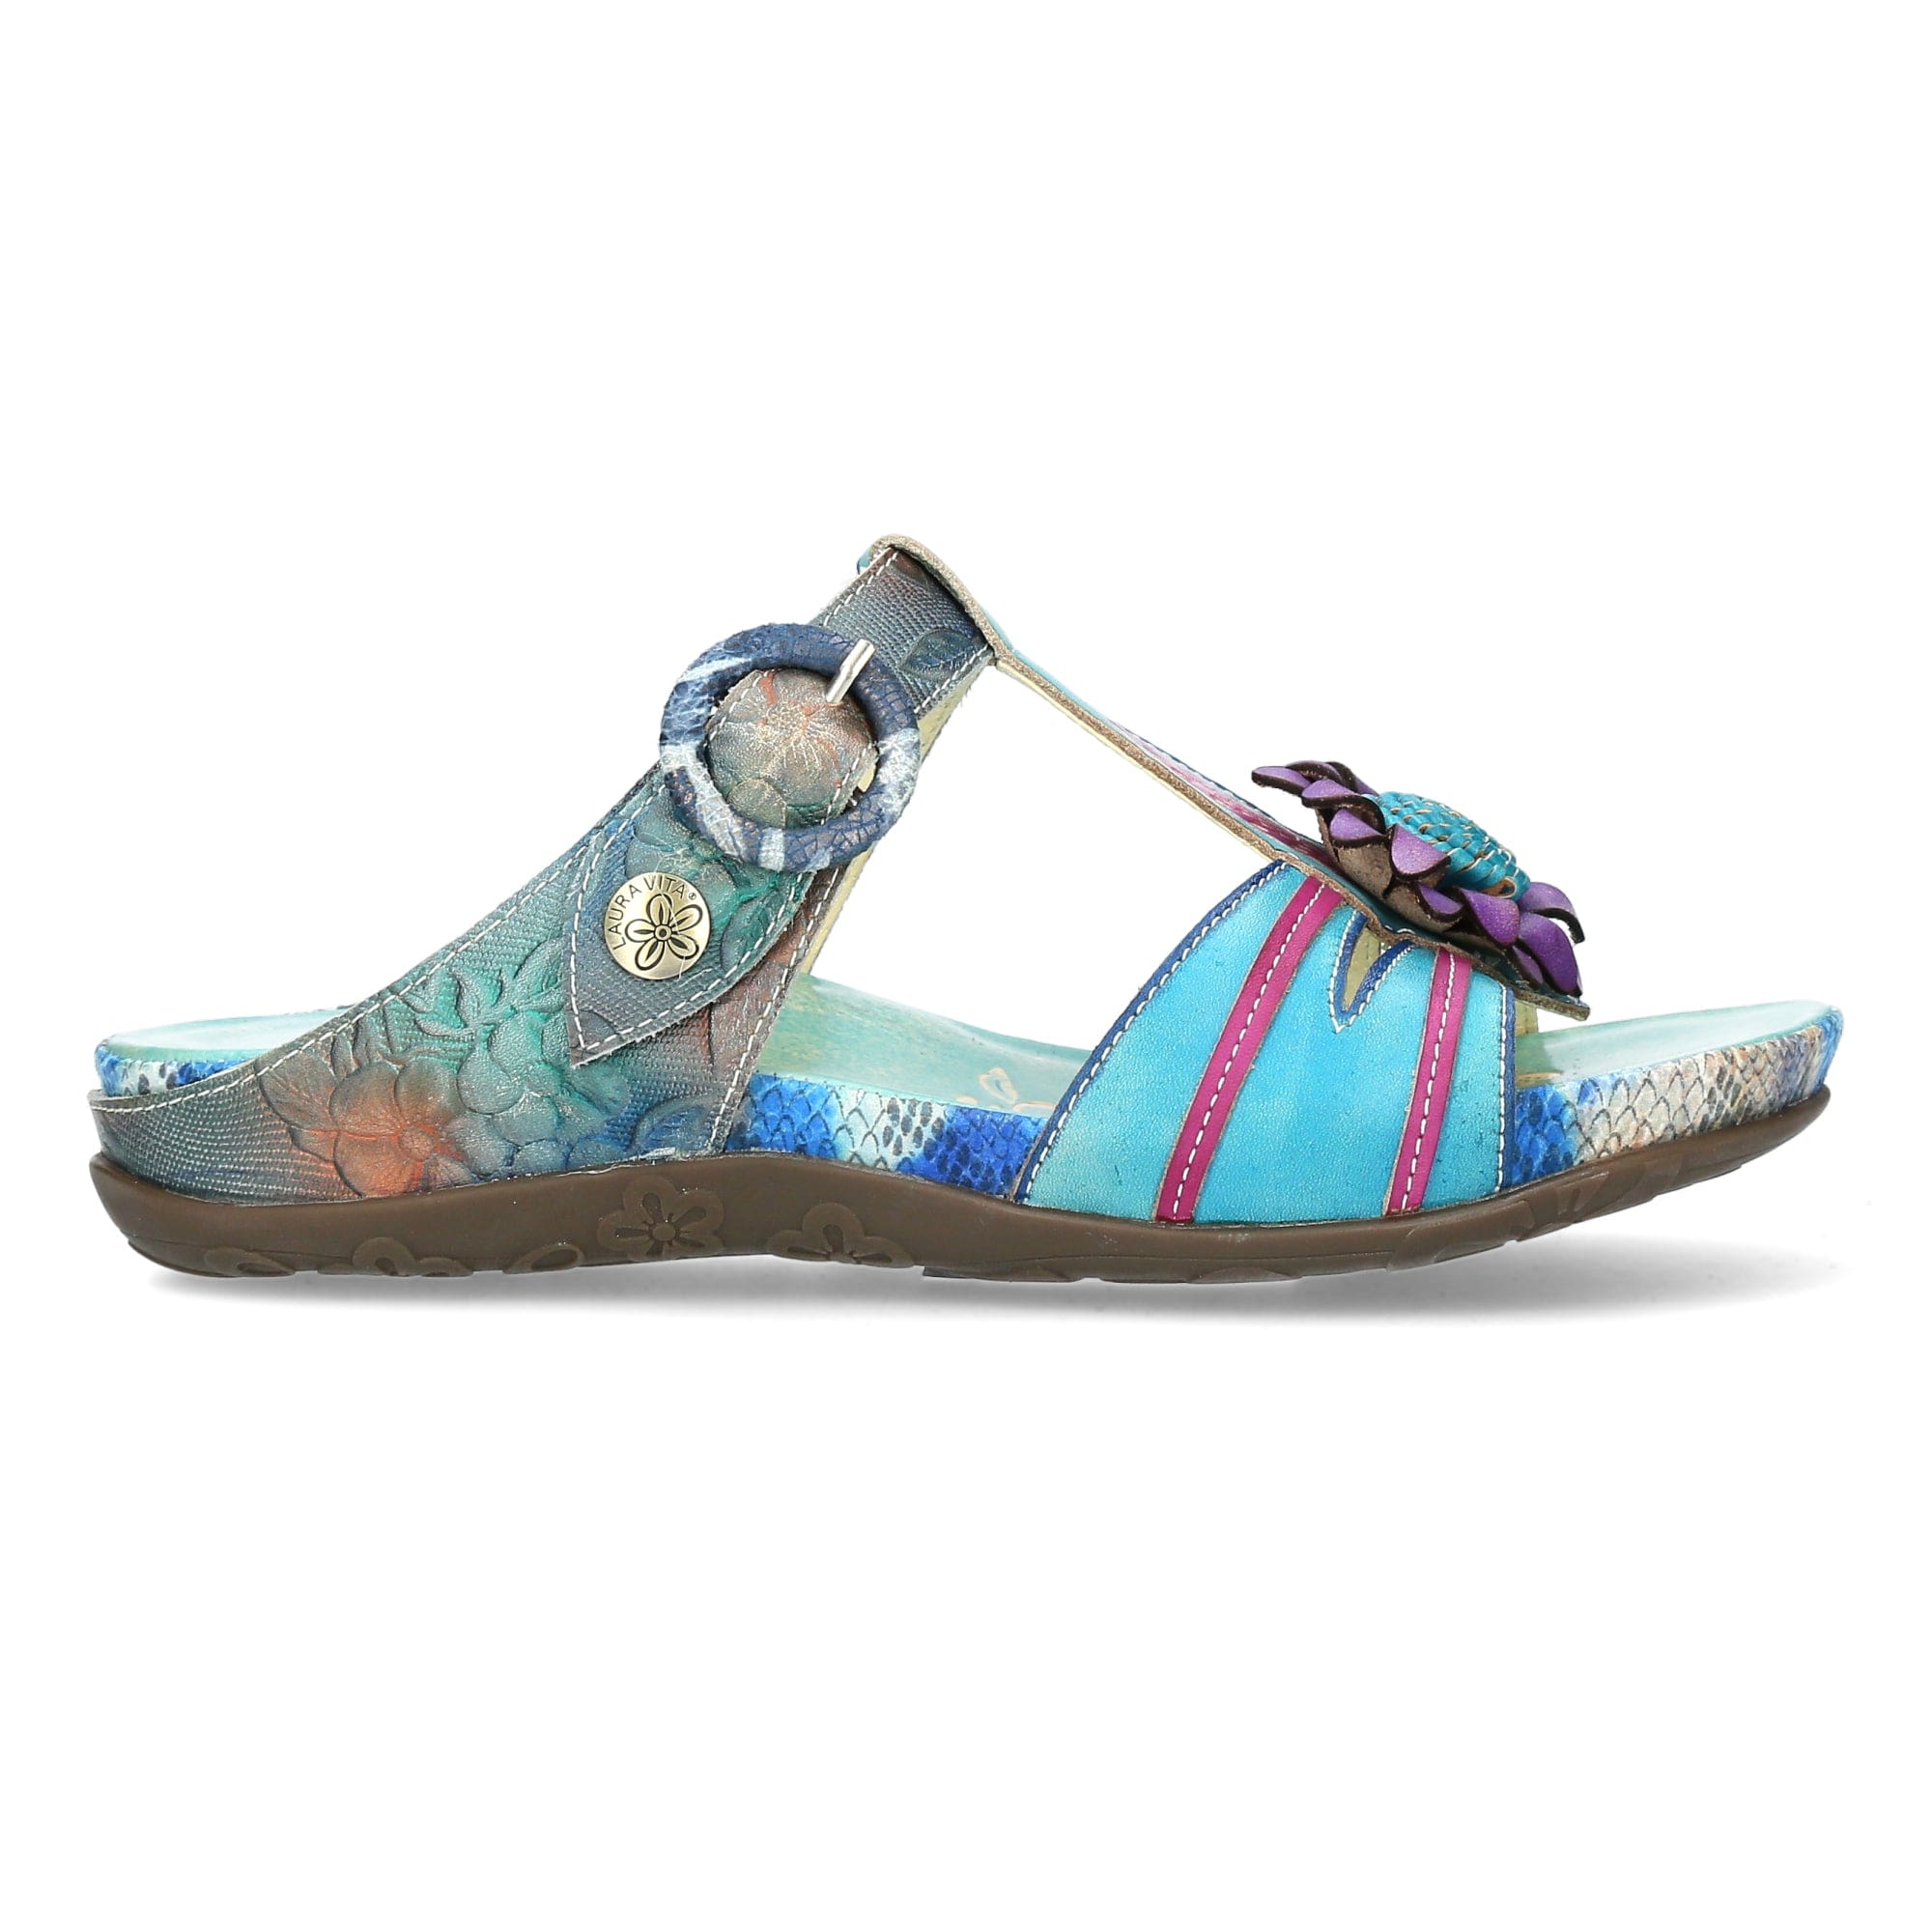 Chaussure LILOO 24 - 35 / Turquoise - Mule